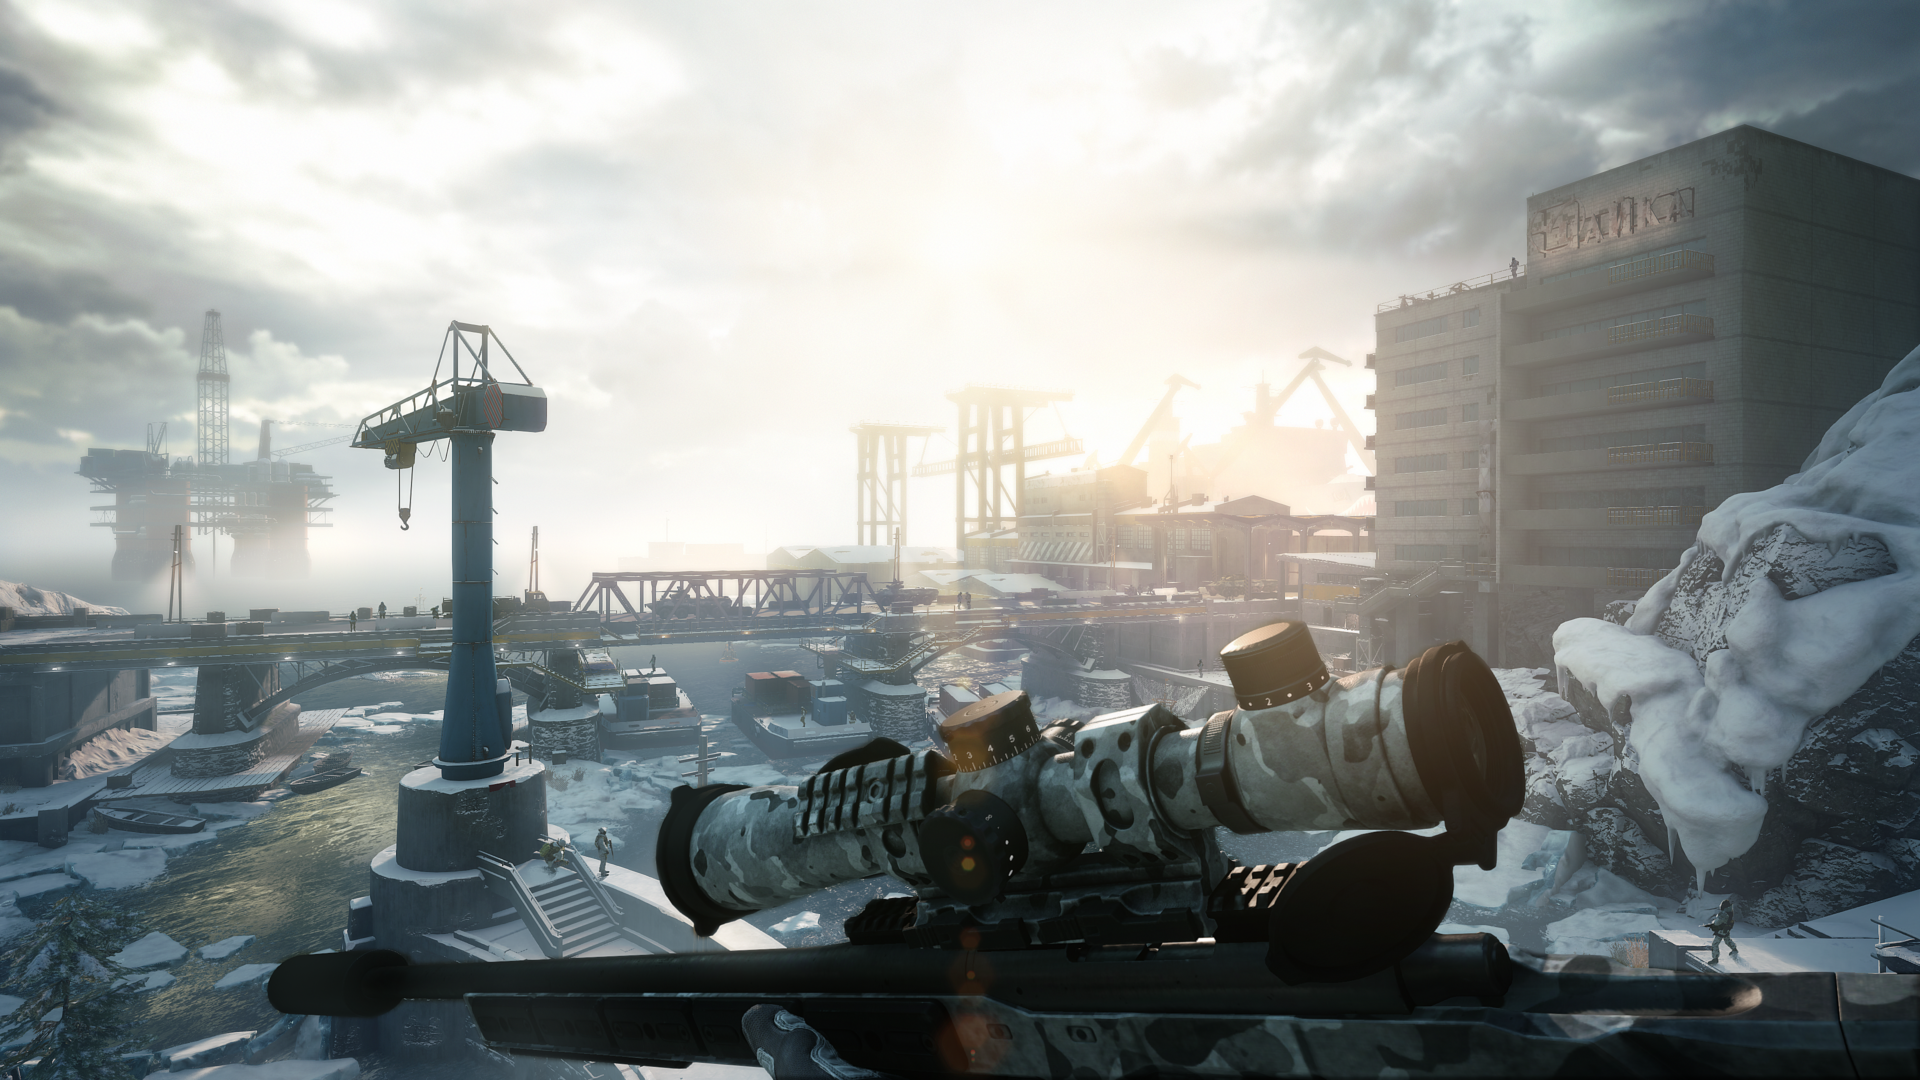 sniper ghost warrior contracts 2 trophies